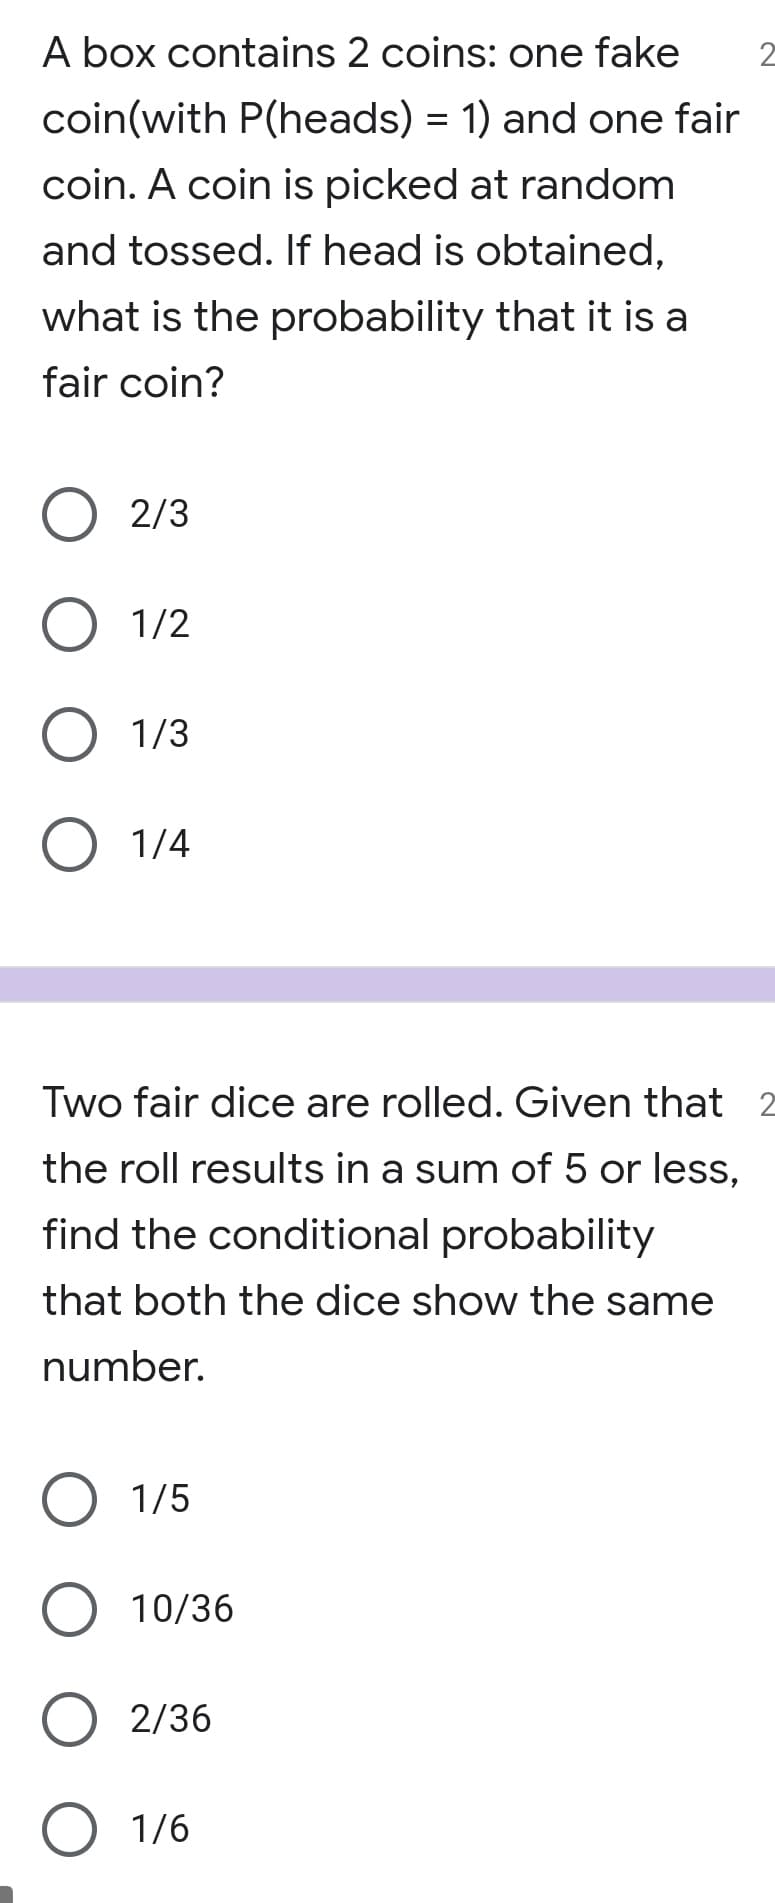 A box contains 2 coins: one fake
2
coin(with P(heads) = 1) and one fair
coin. A coin is picked at random
and tossed. If head is obtained,
what is the probability that it is a
fair coin?
2/3
1/2
1/3
1/4
Two fair dice are rolled. Given that 2
the roll results in a sum of 5 or less,
find the conditional probability
that both the dice show the same
number.
1/5
10/36
2/36
O 1/6
